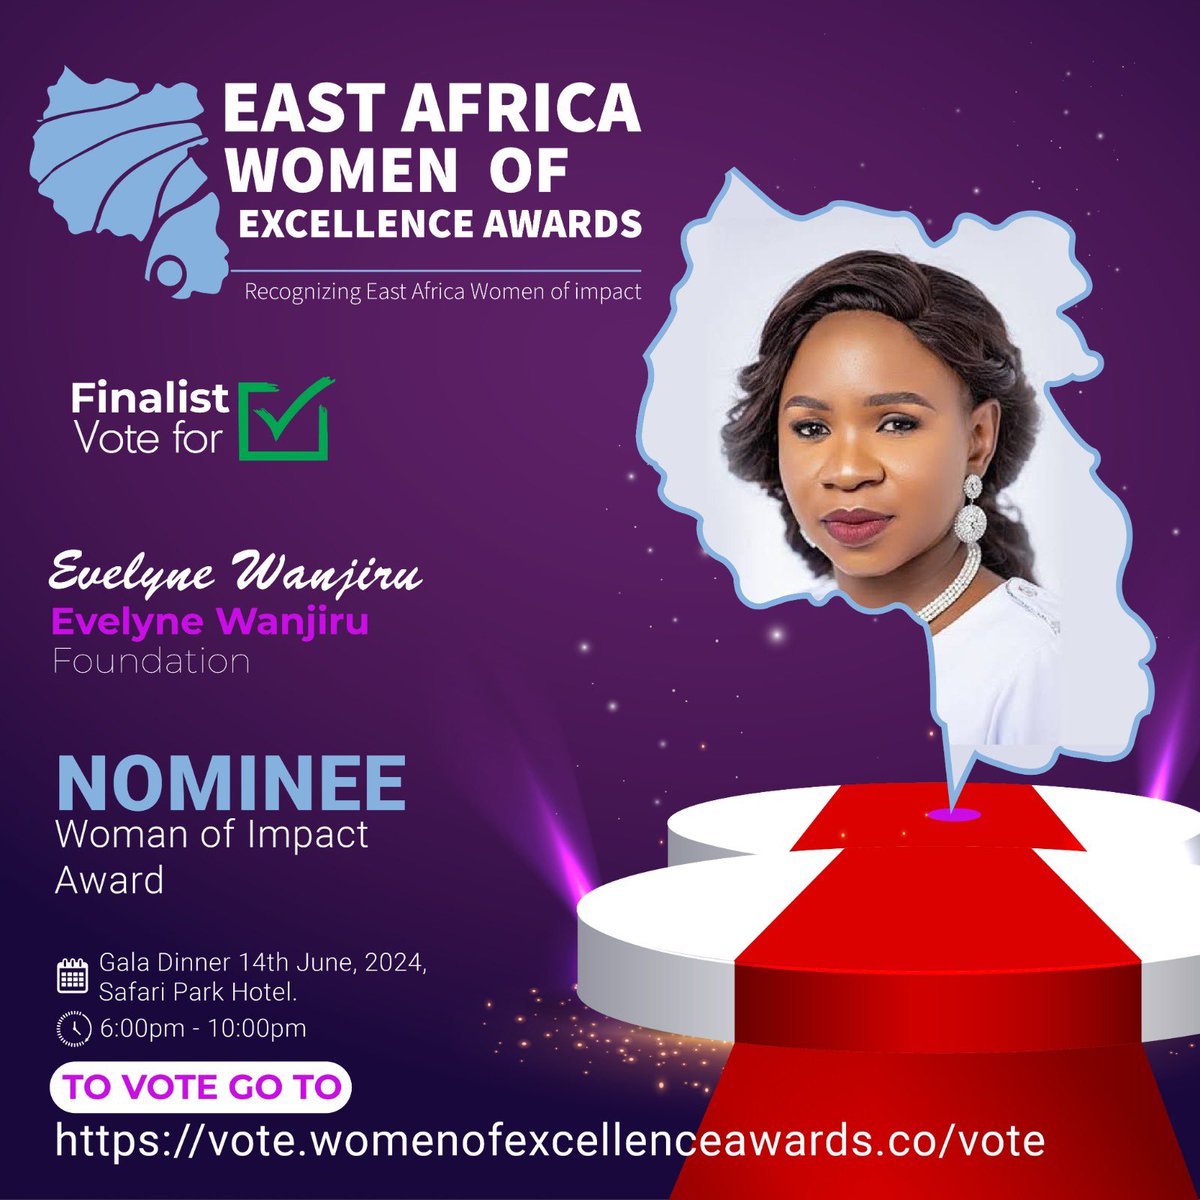 Thank you @womenofexcellenceawards for nominating #evelynwanjirufoundation See poster for more details on how to vote🙏